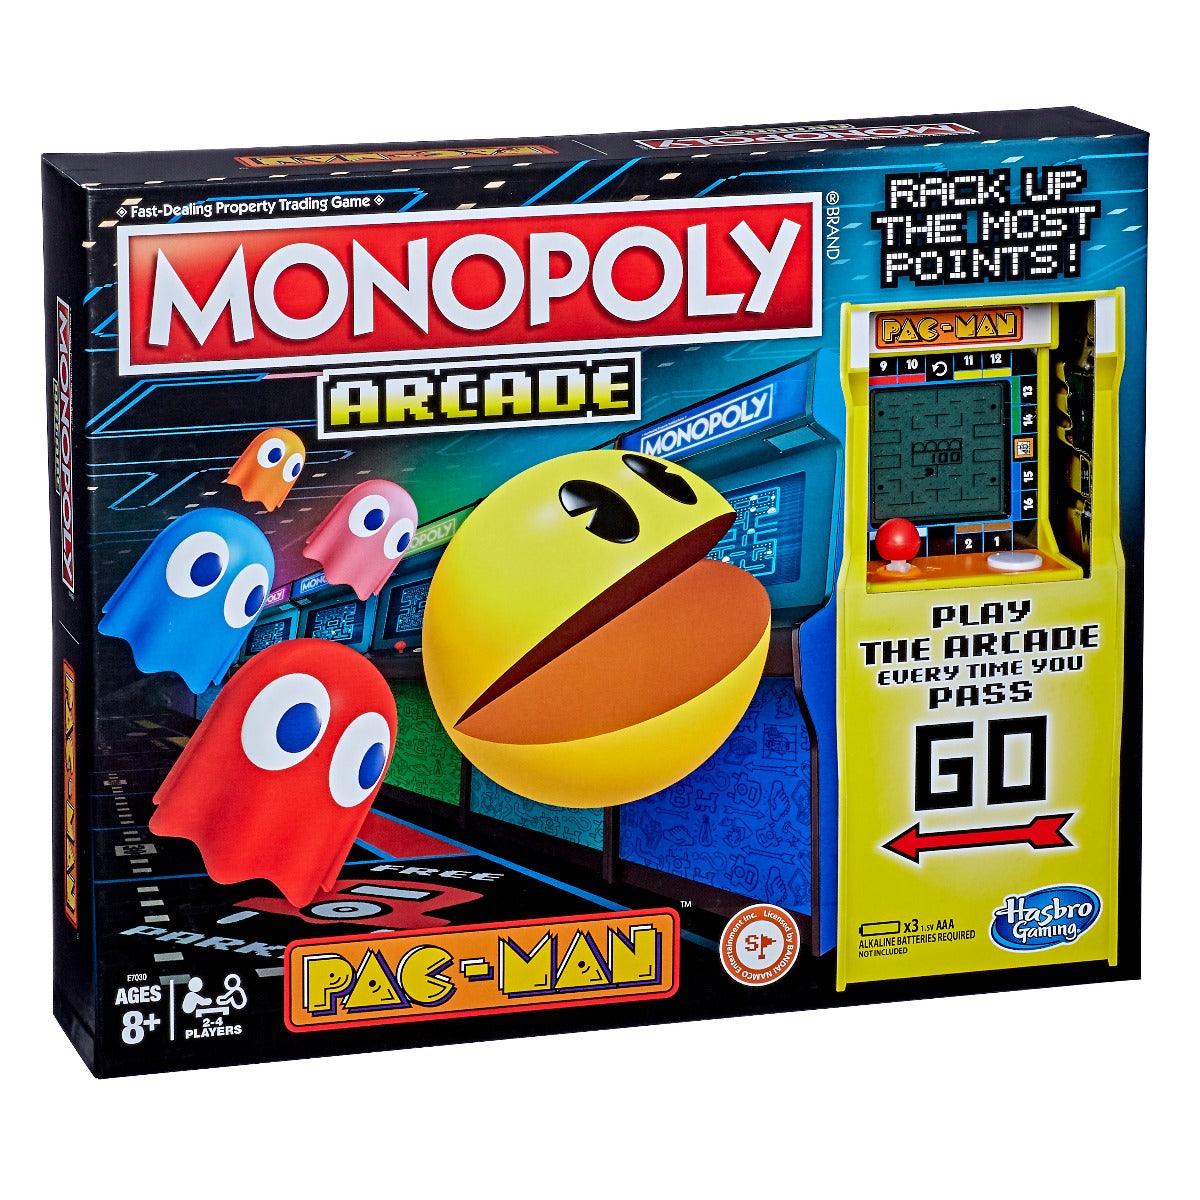 Monopoly Arcade Pac-Man Game; Monopoly Board Game for Kids Ages 8 and Up; Includes Banking and Arcade Unit